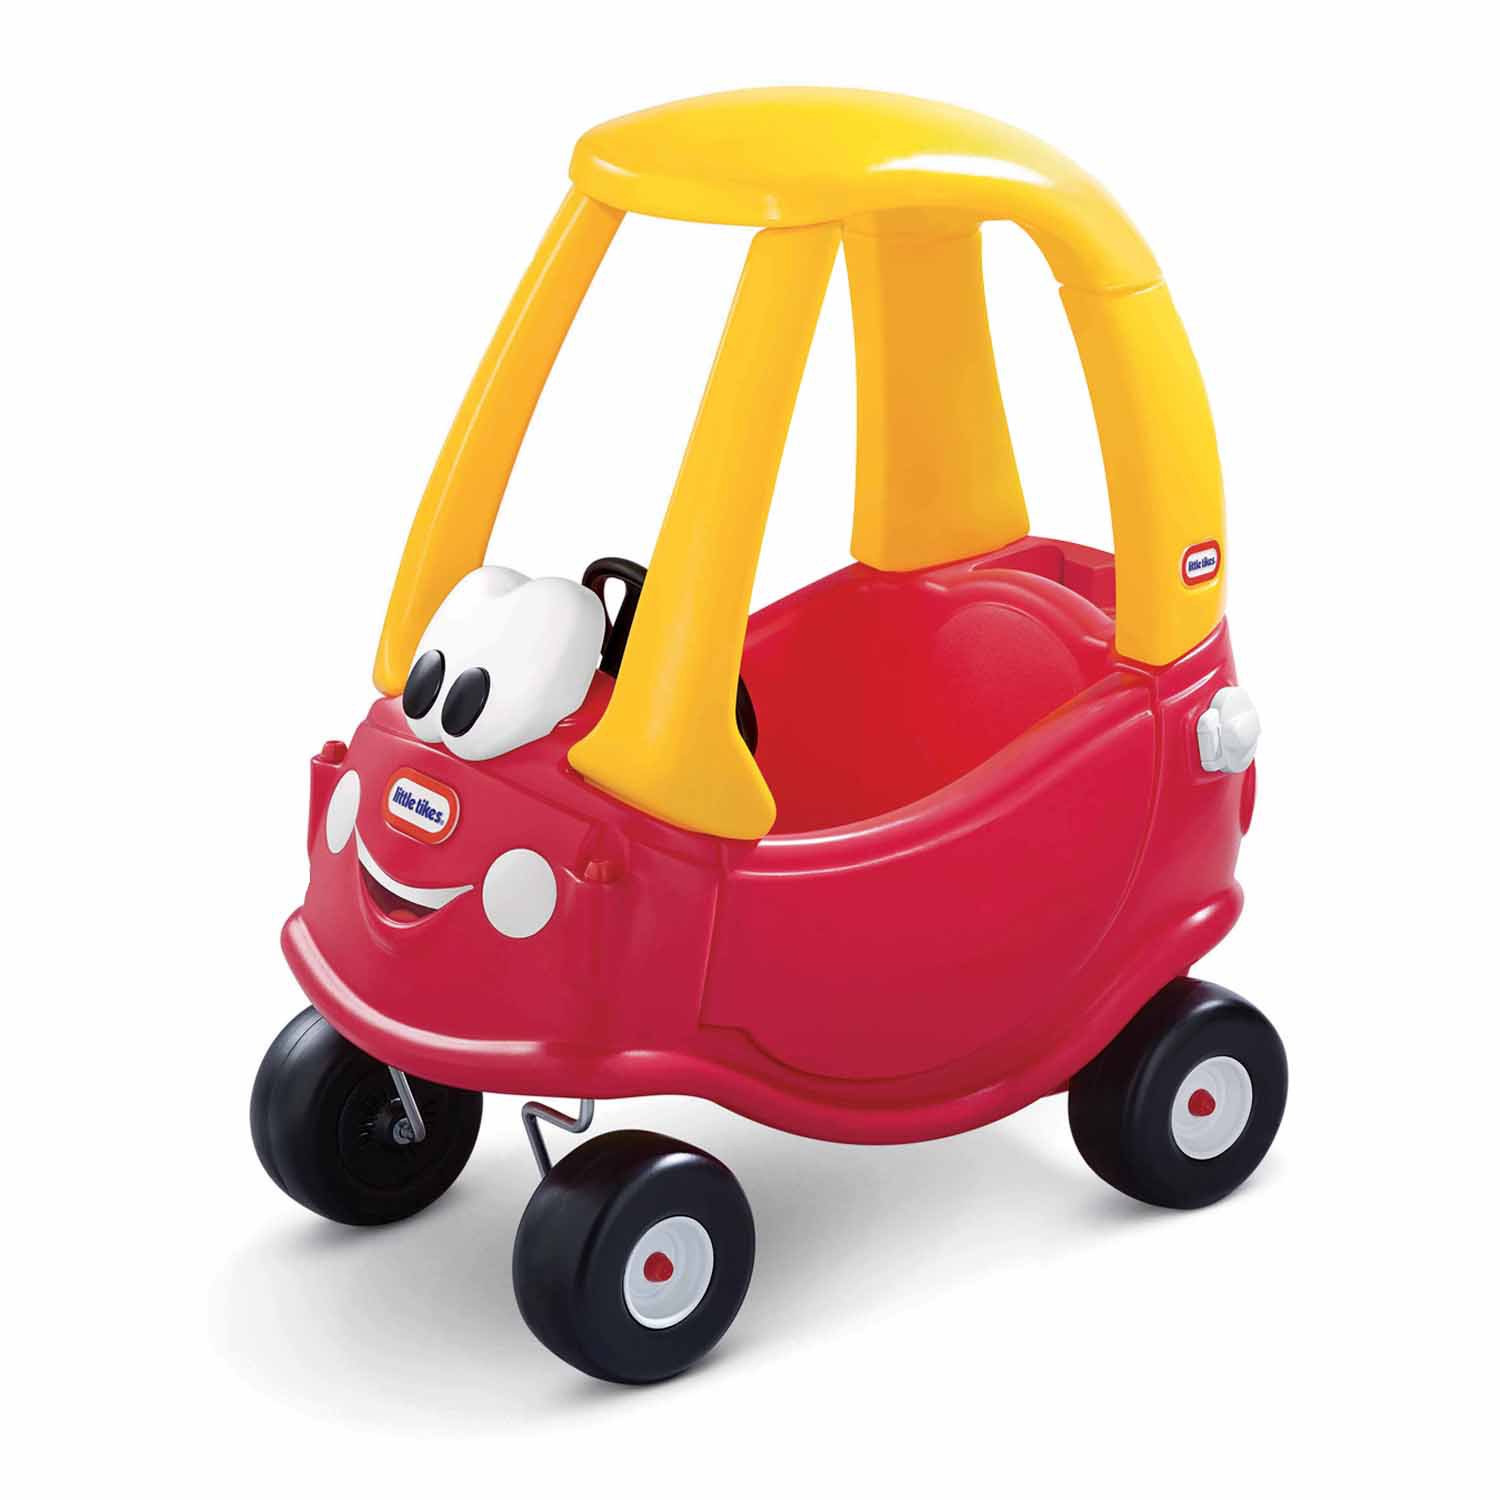 Cozy Coupe 30th Anniversary Edition at Little Tikes